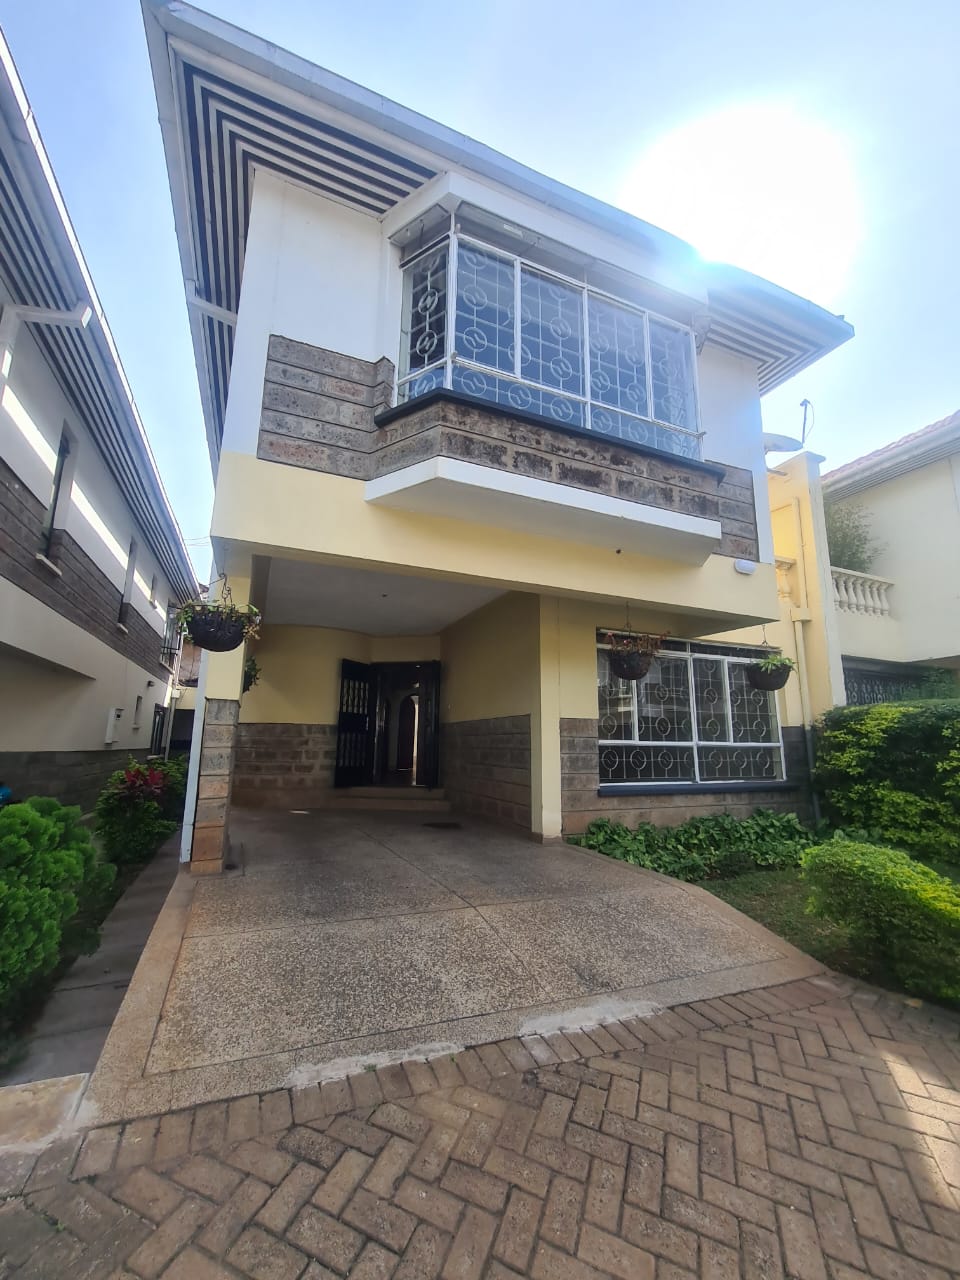 4 Bedrooms 2 Ensuite with SQ for rent at Ksh170kMonth in Kilimani (6)